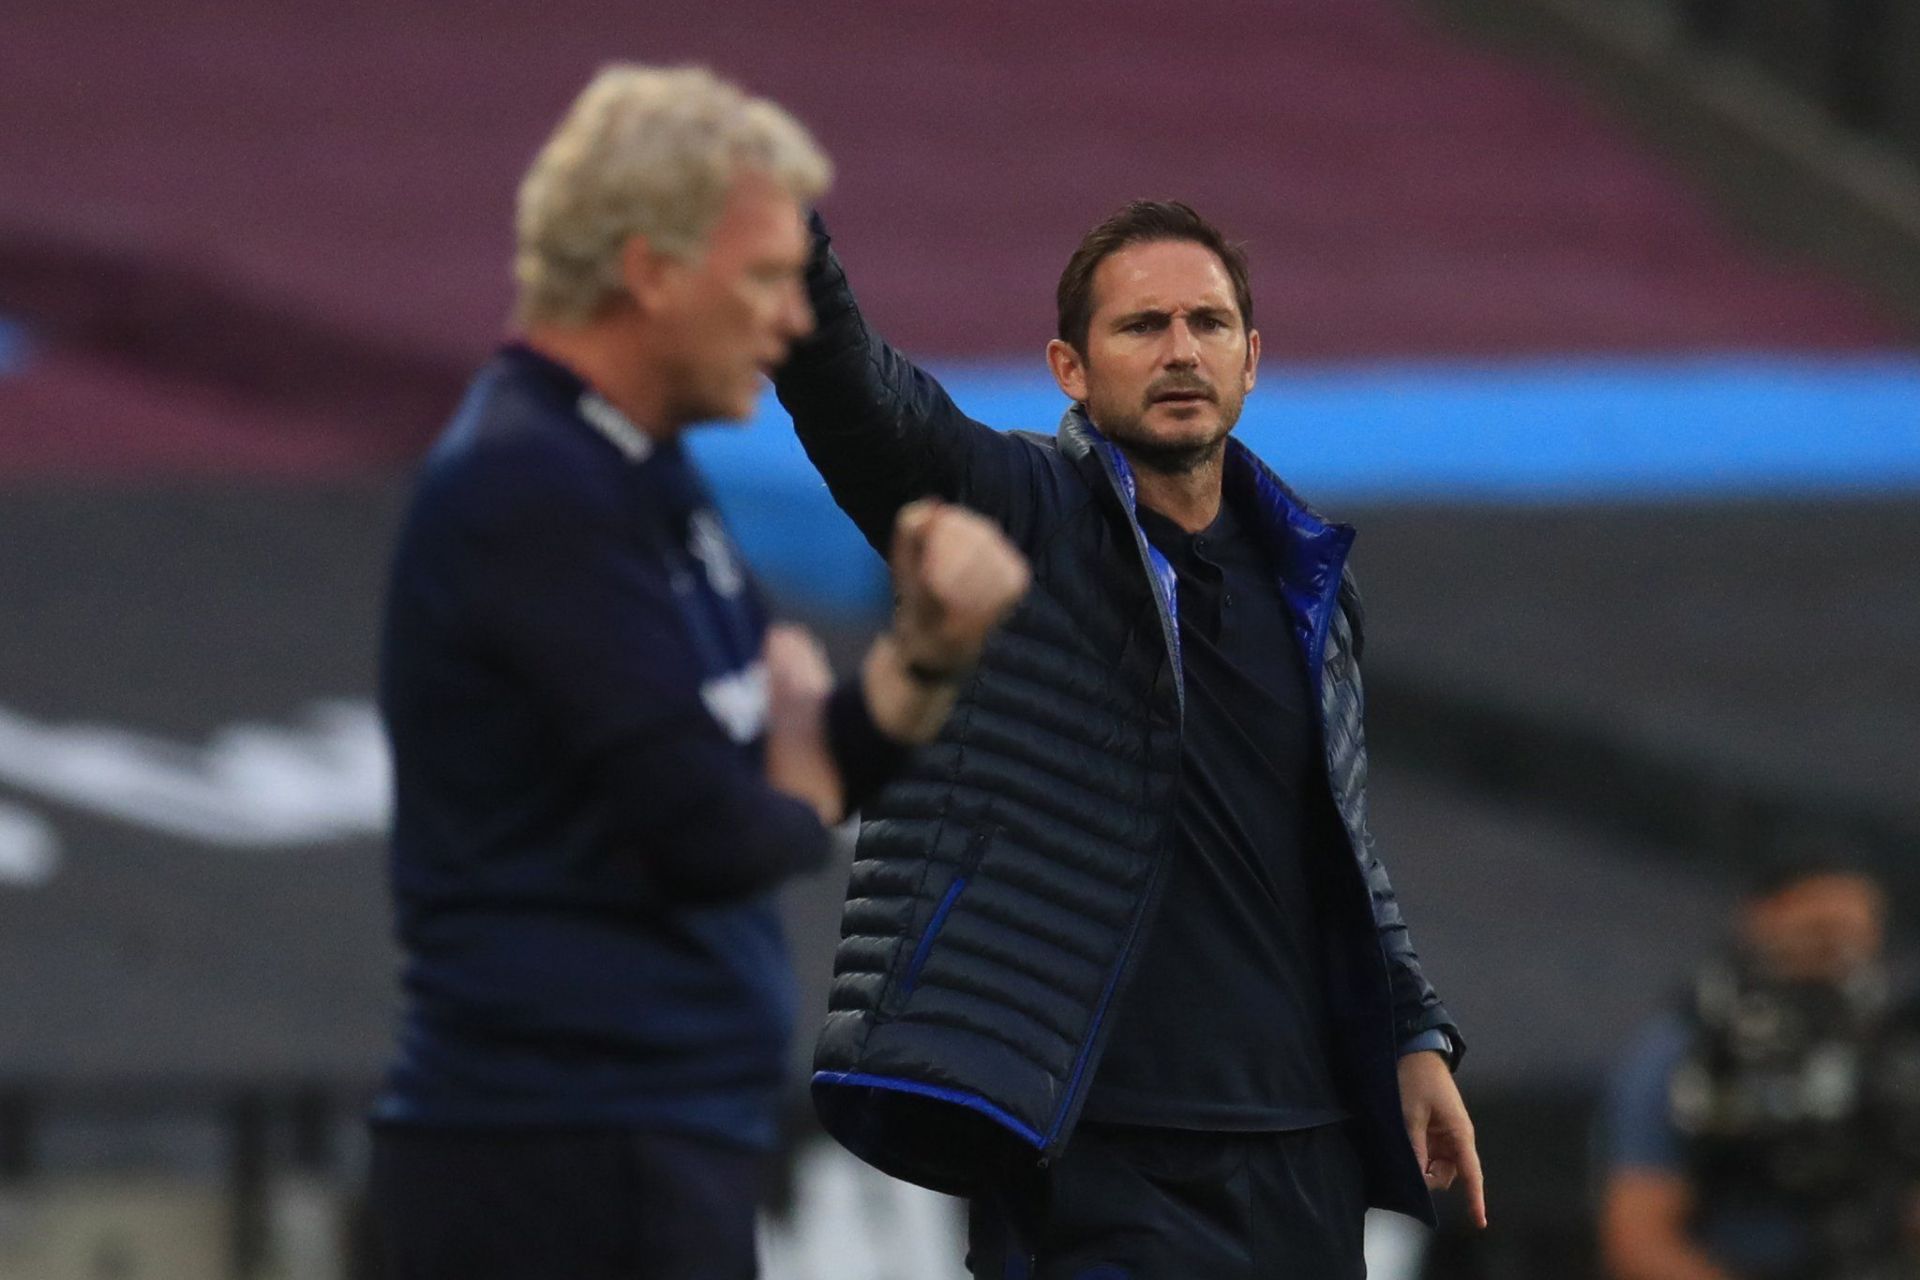 Everton have lost eight of their last 10 matches under Frank Lampard